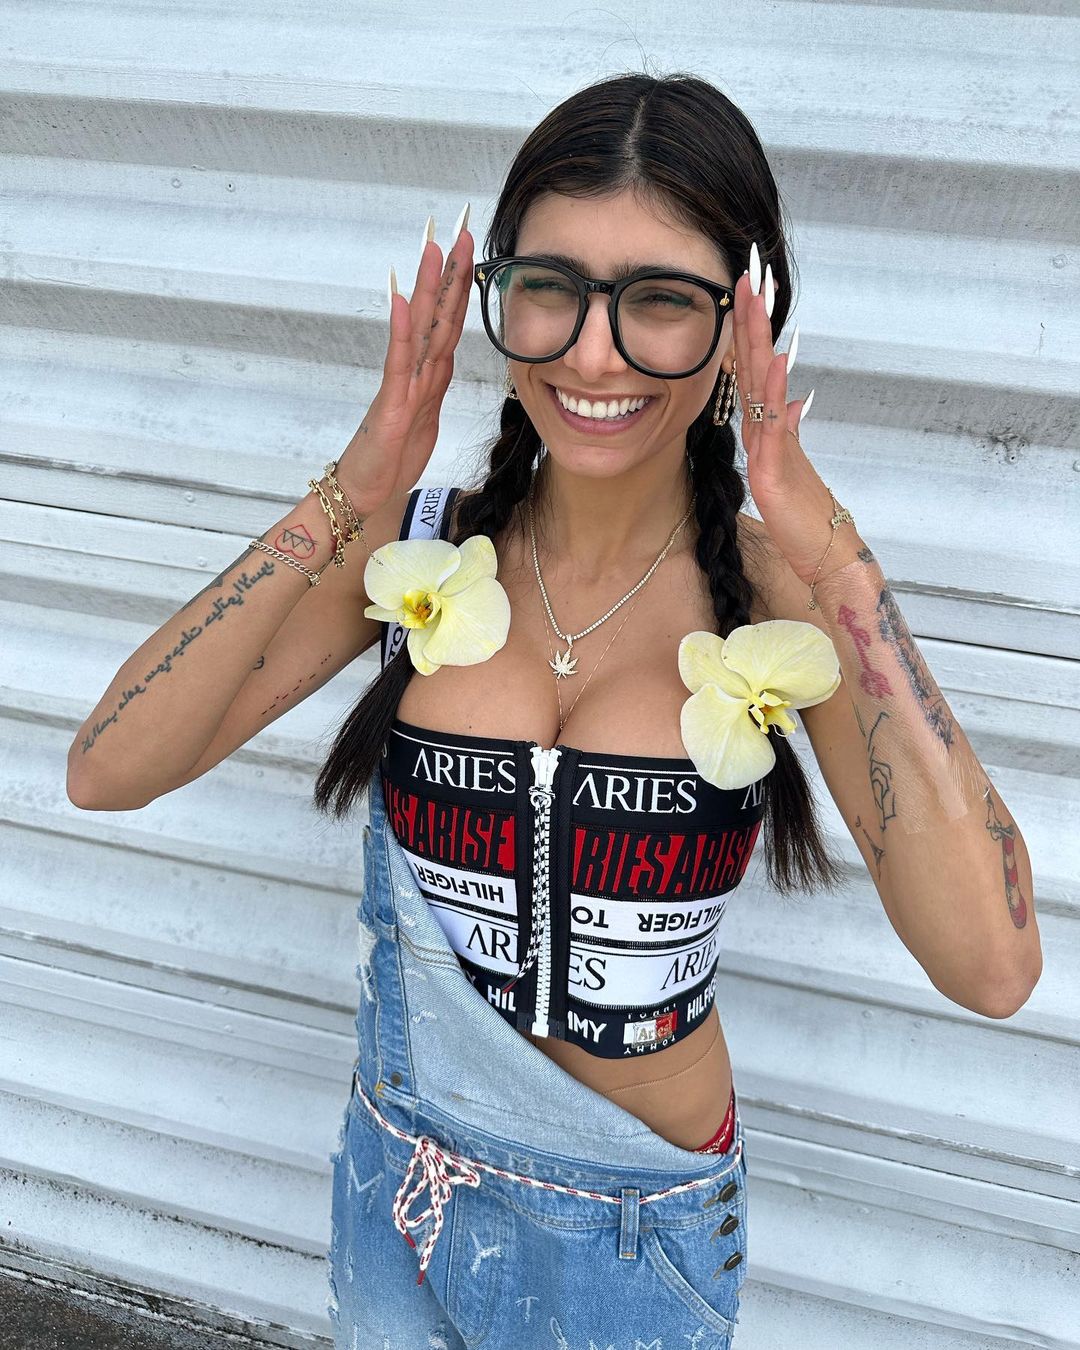 Mia Khalifa was left in tears after fans girlfriend insulted her in cafe